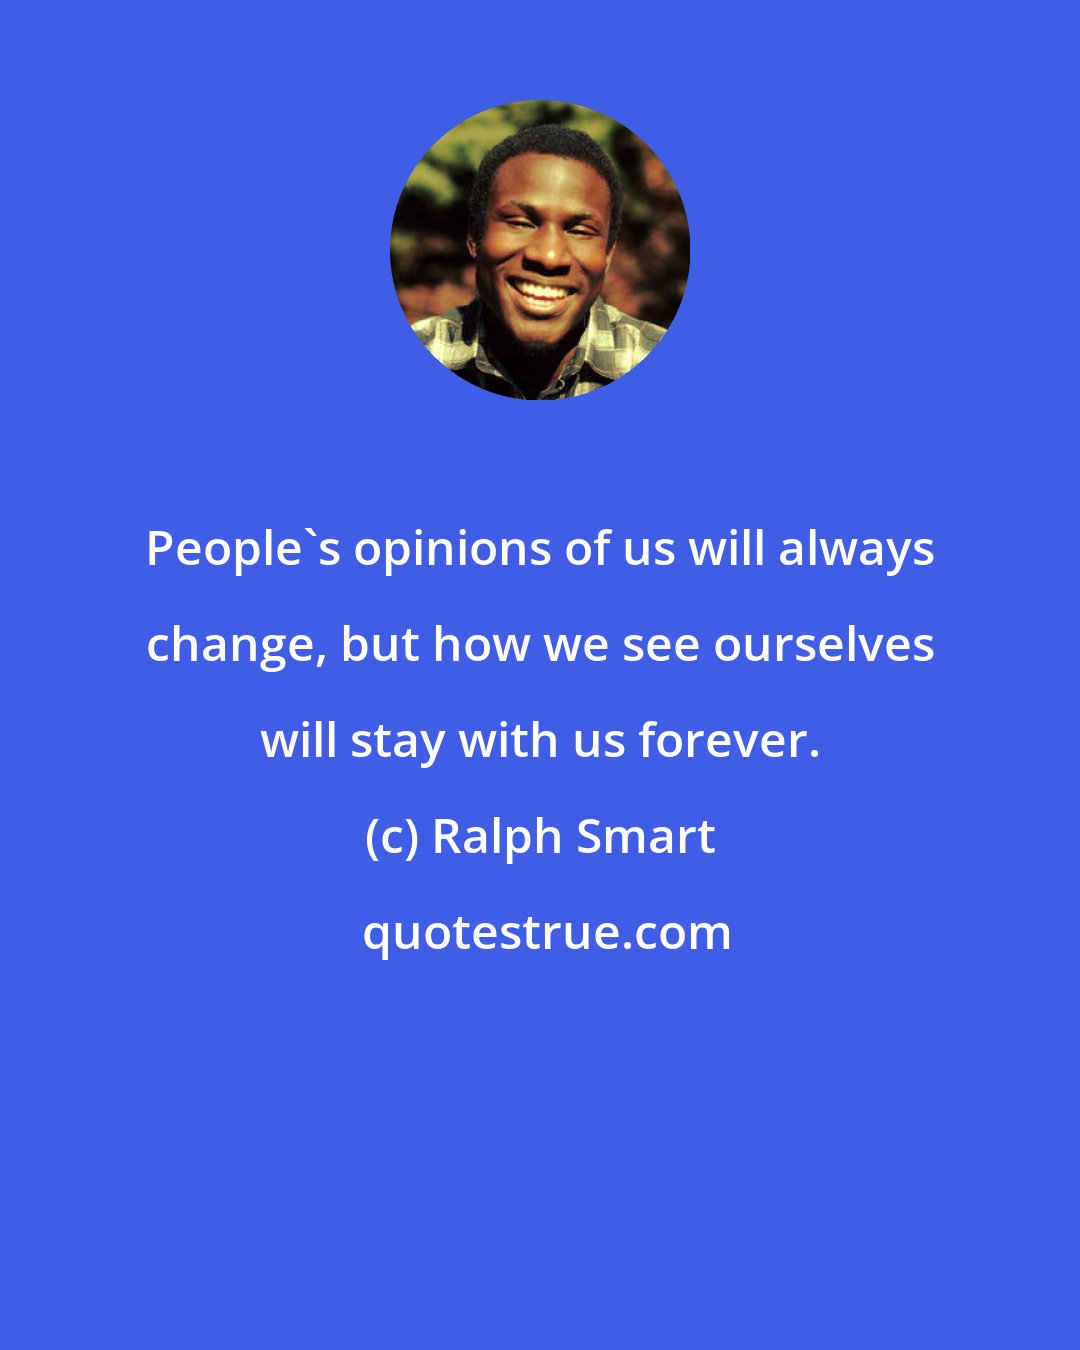 Ralph Smart: People's opinions of us will always change, but how we see ourselves will stay with us forever.